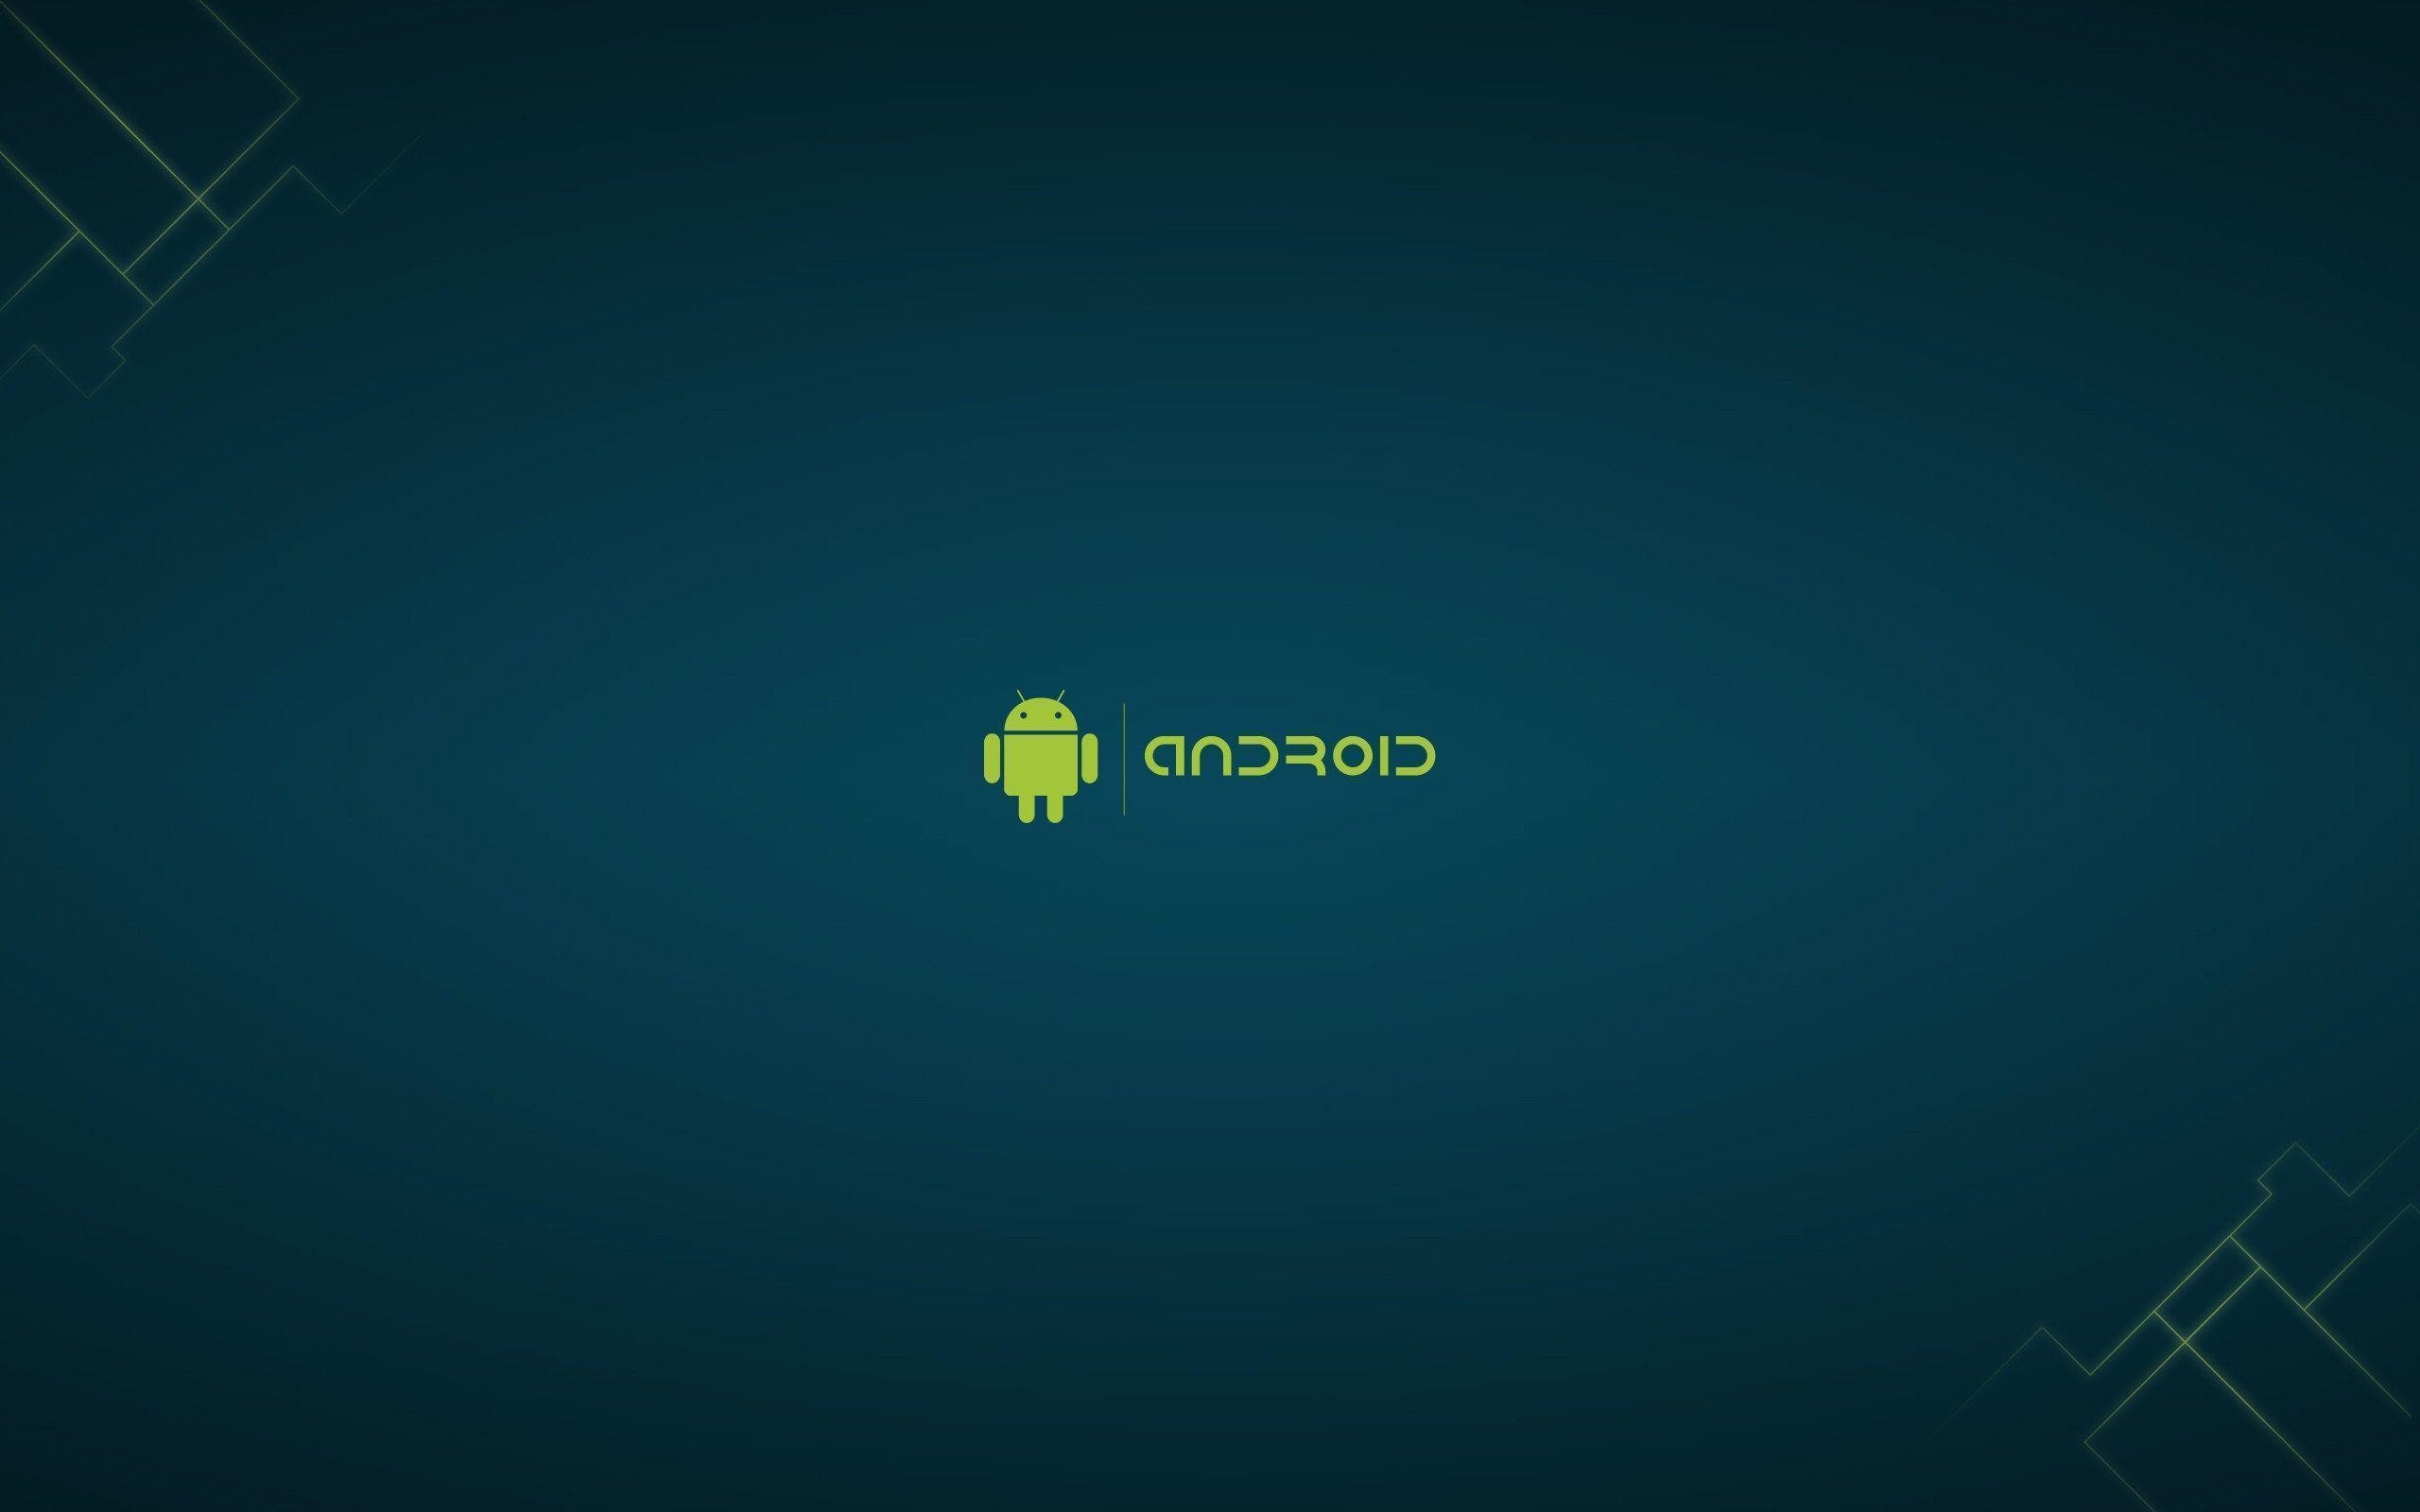 2560x1600 Android logo wallpaper |  | 811 | WallpaperUP